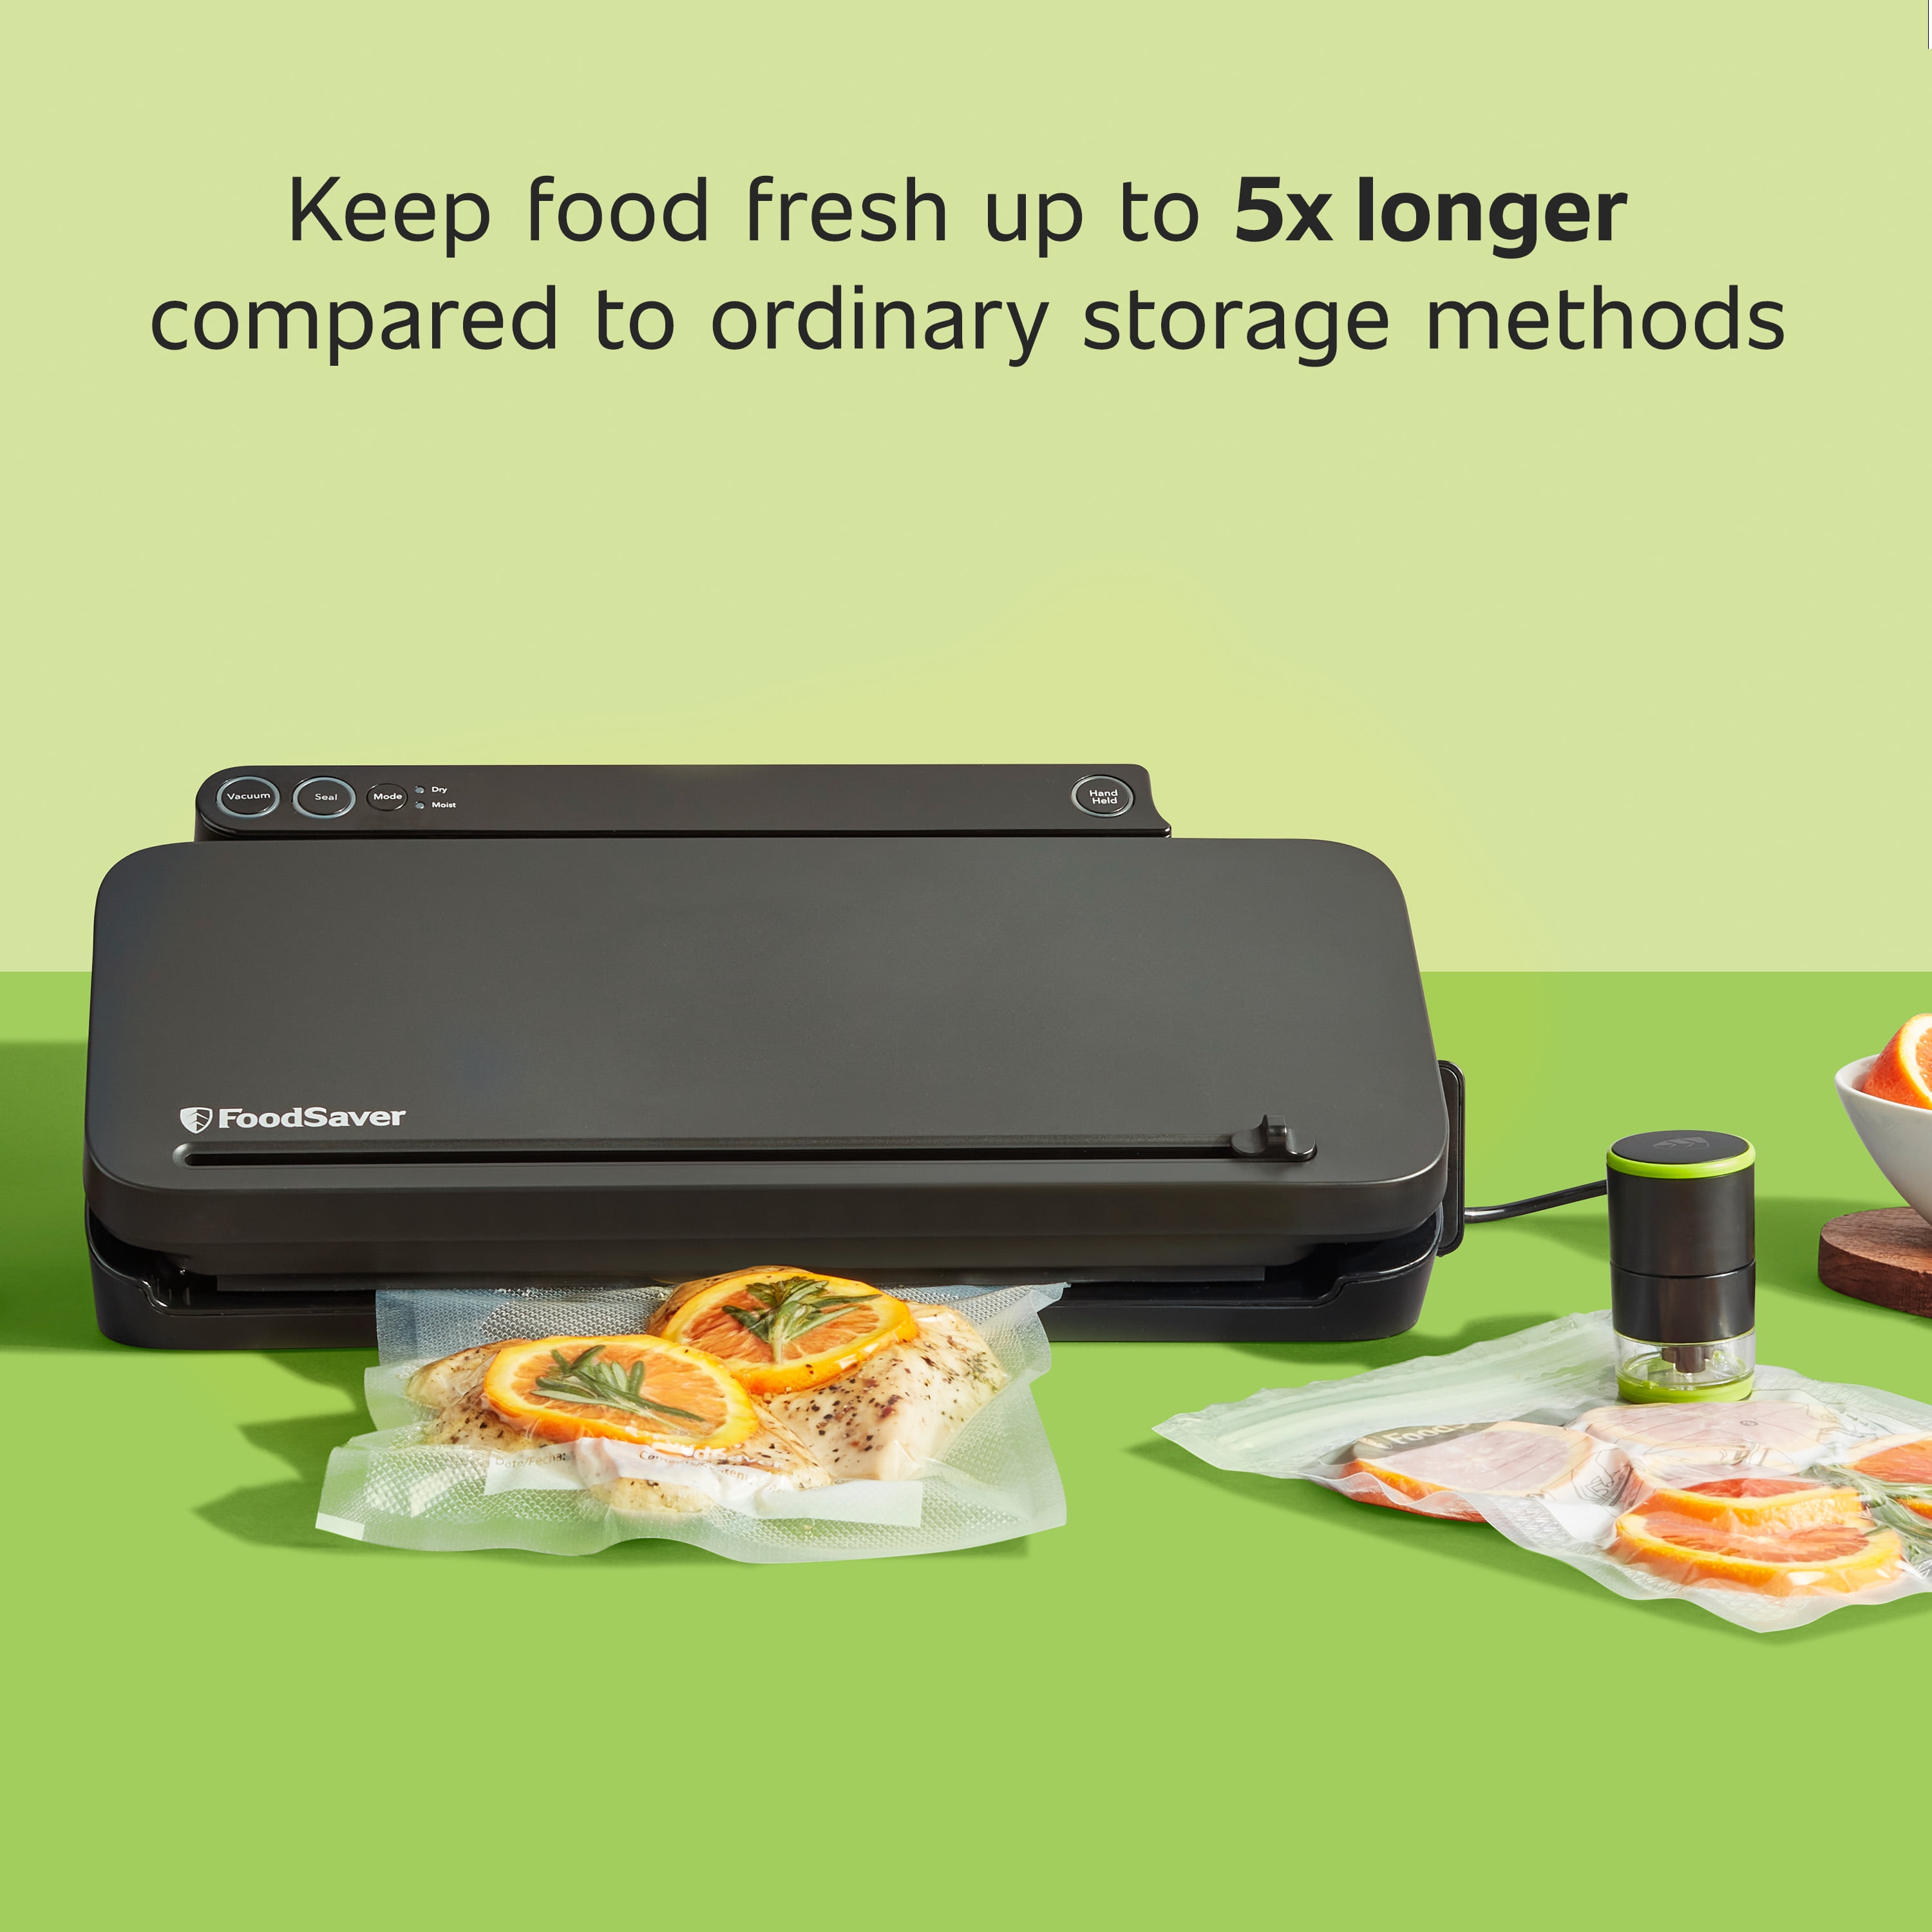 FoodSaver - Let nothing go to waste with our Multi-Use Handheld Vacuum  Sealer. Fresh Tip: Seal snacking veggies like celery and carrots in # foodsaver bags to keep them crunchy and delicious. Click